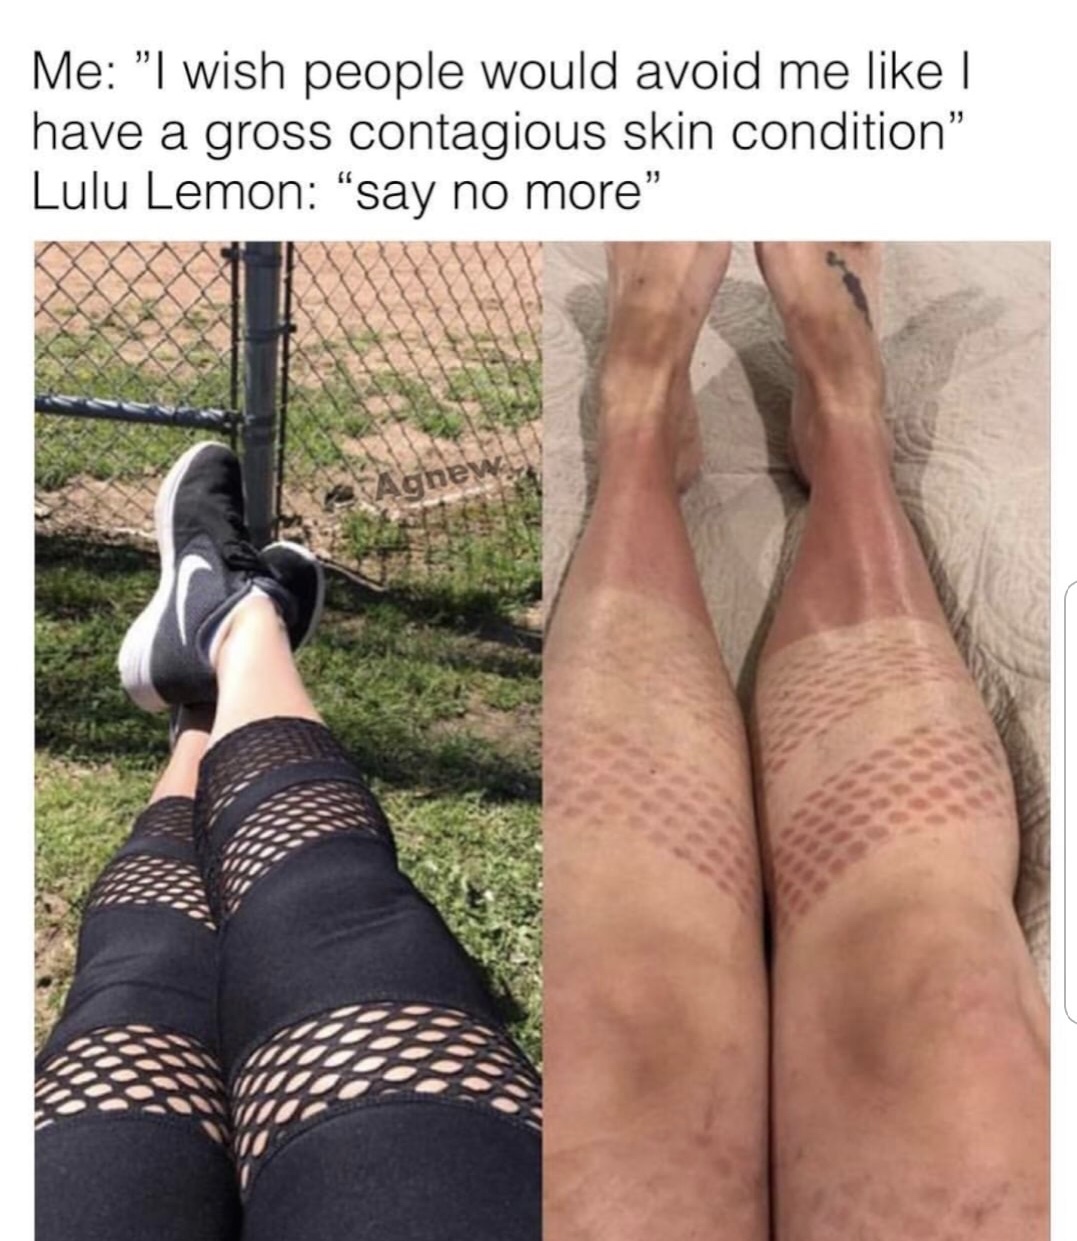 lulu lemon meme - Me "I wish people would avoid me | have a gross contagious skin condition Lulu Lemon say no more Agnew